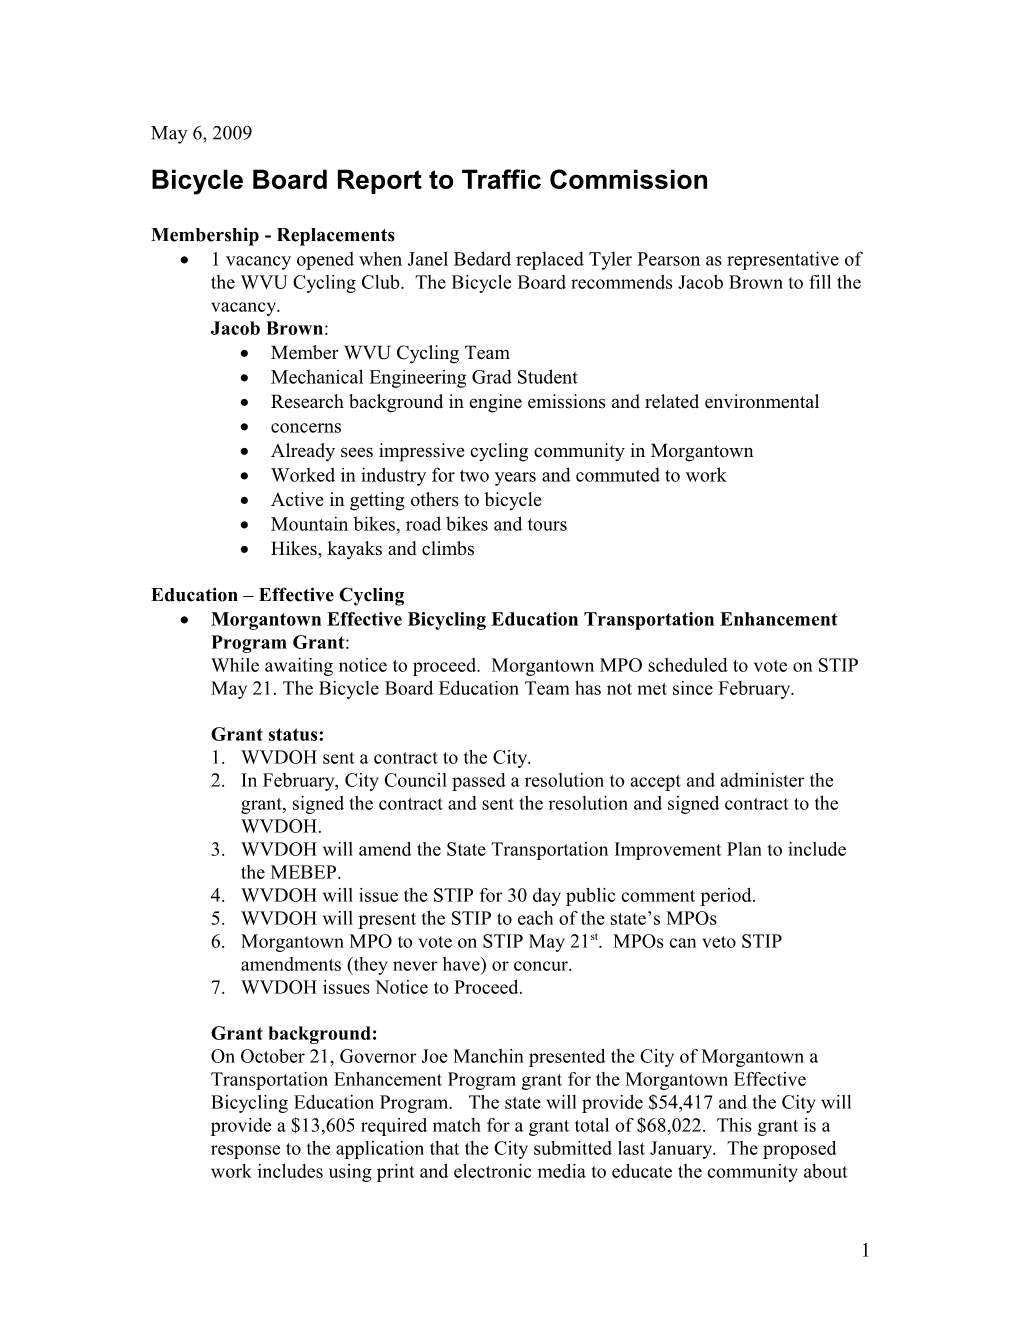 Bicycle Board Report to Traffic Commission